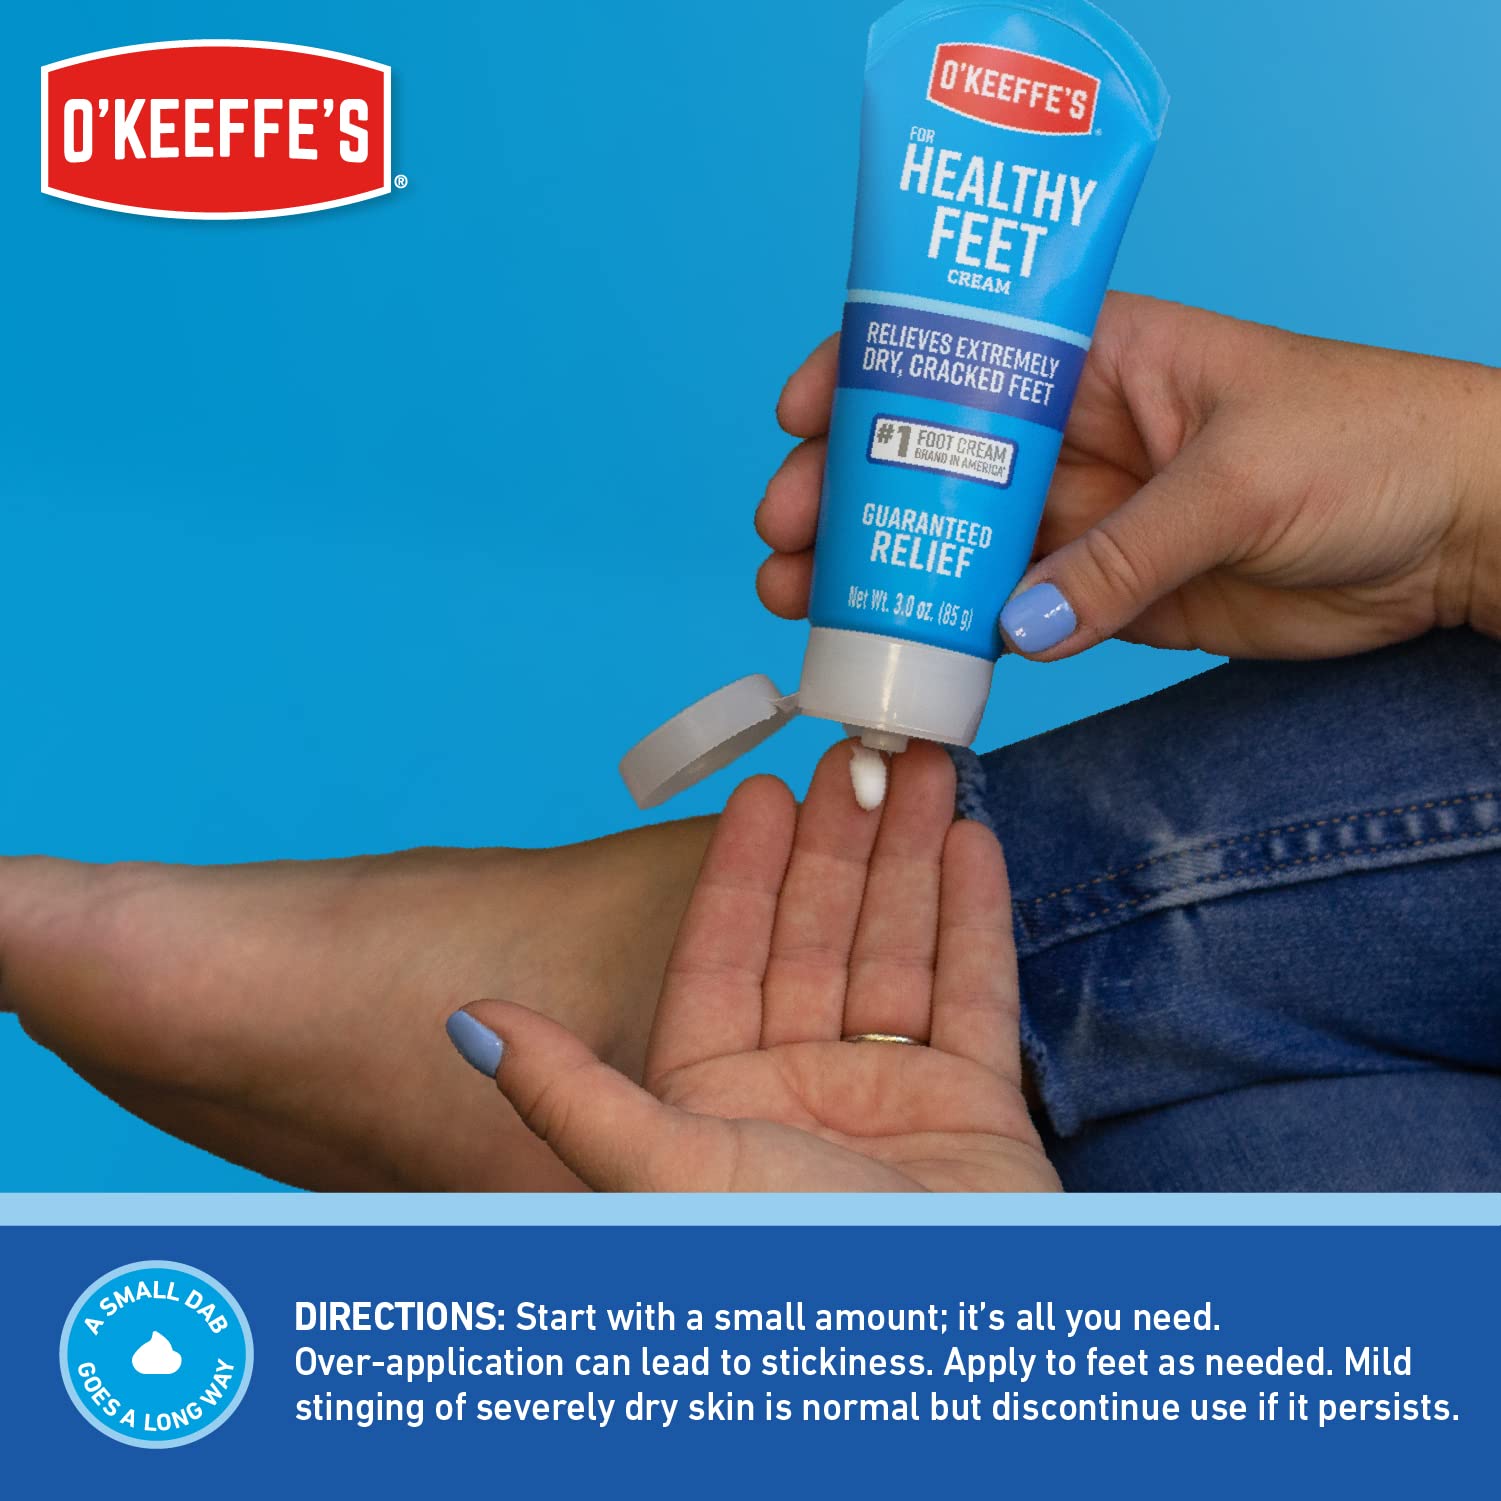 O'Keeffe's for Healthy Feet Foot Cream, Guaranteed Relief for Extremely Dry, Cracked Feet, Clinically Proven to Instantly Boost Moisture Levels, 3.0 Ounce Tube, (Pack of 2)